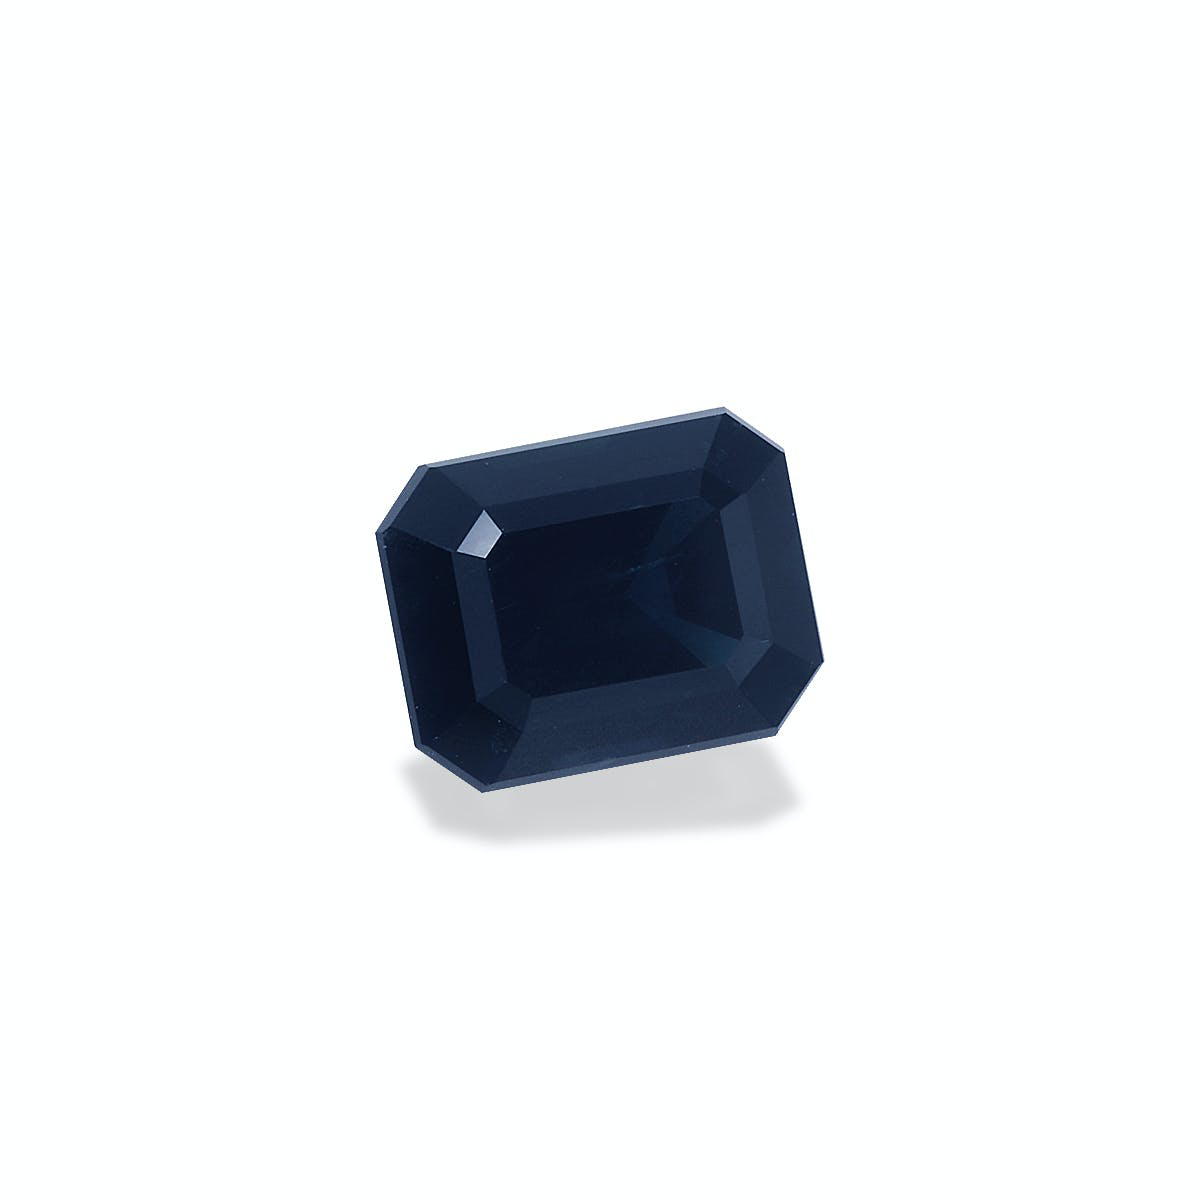 Picture of Blue Teal Sapphire 2.00ct (TL0081)